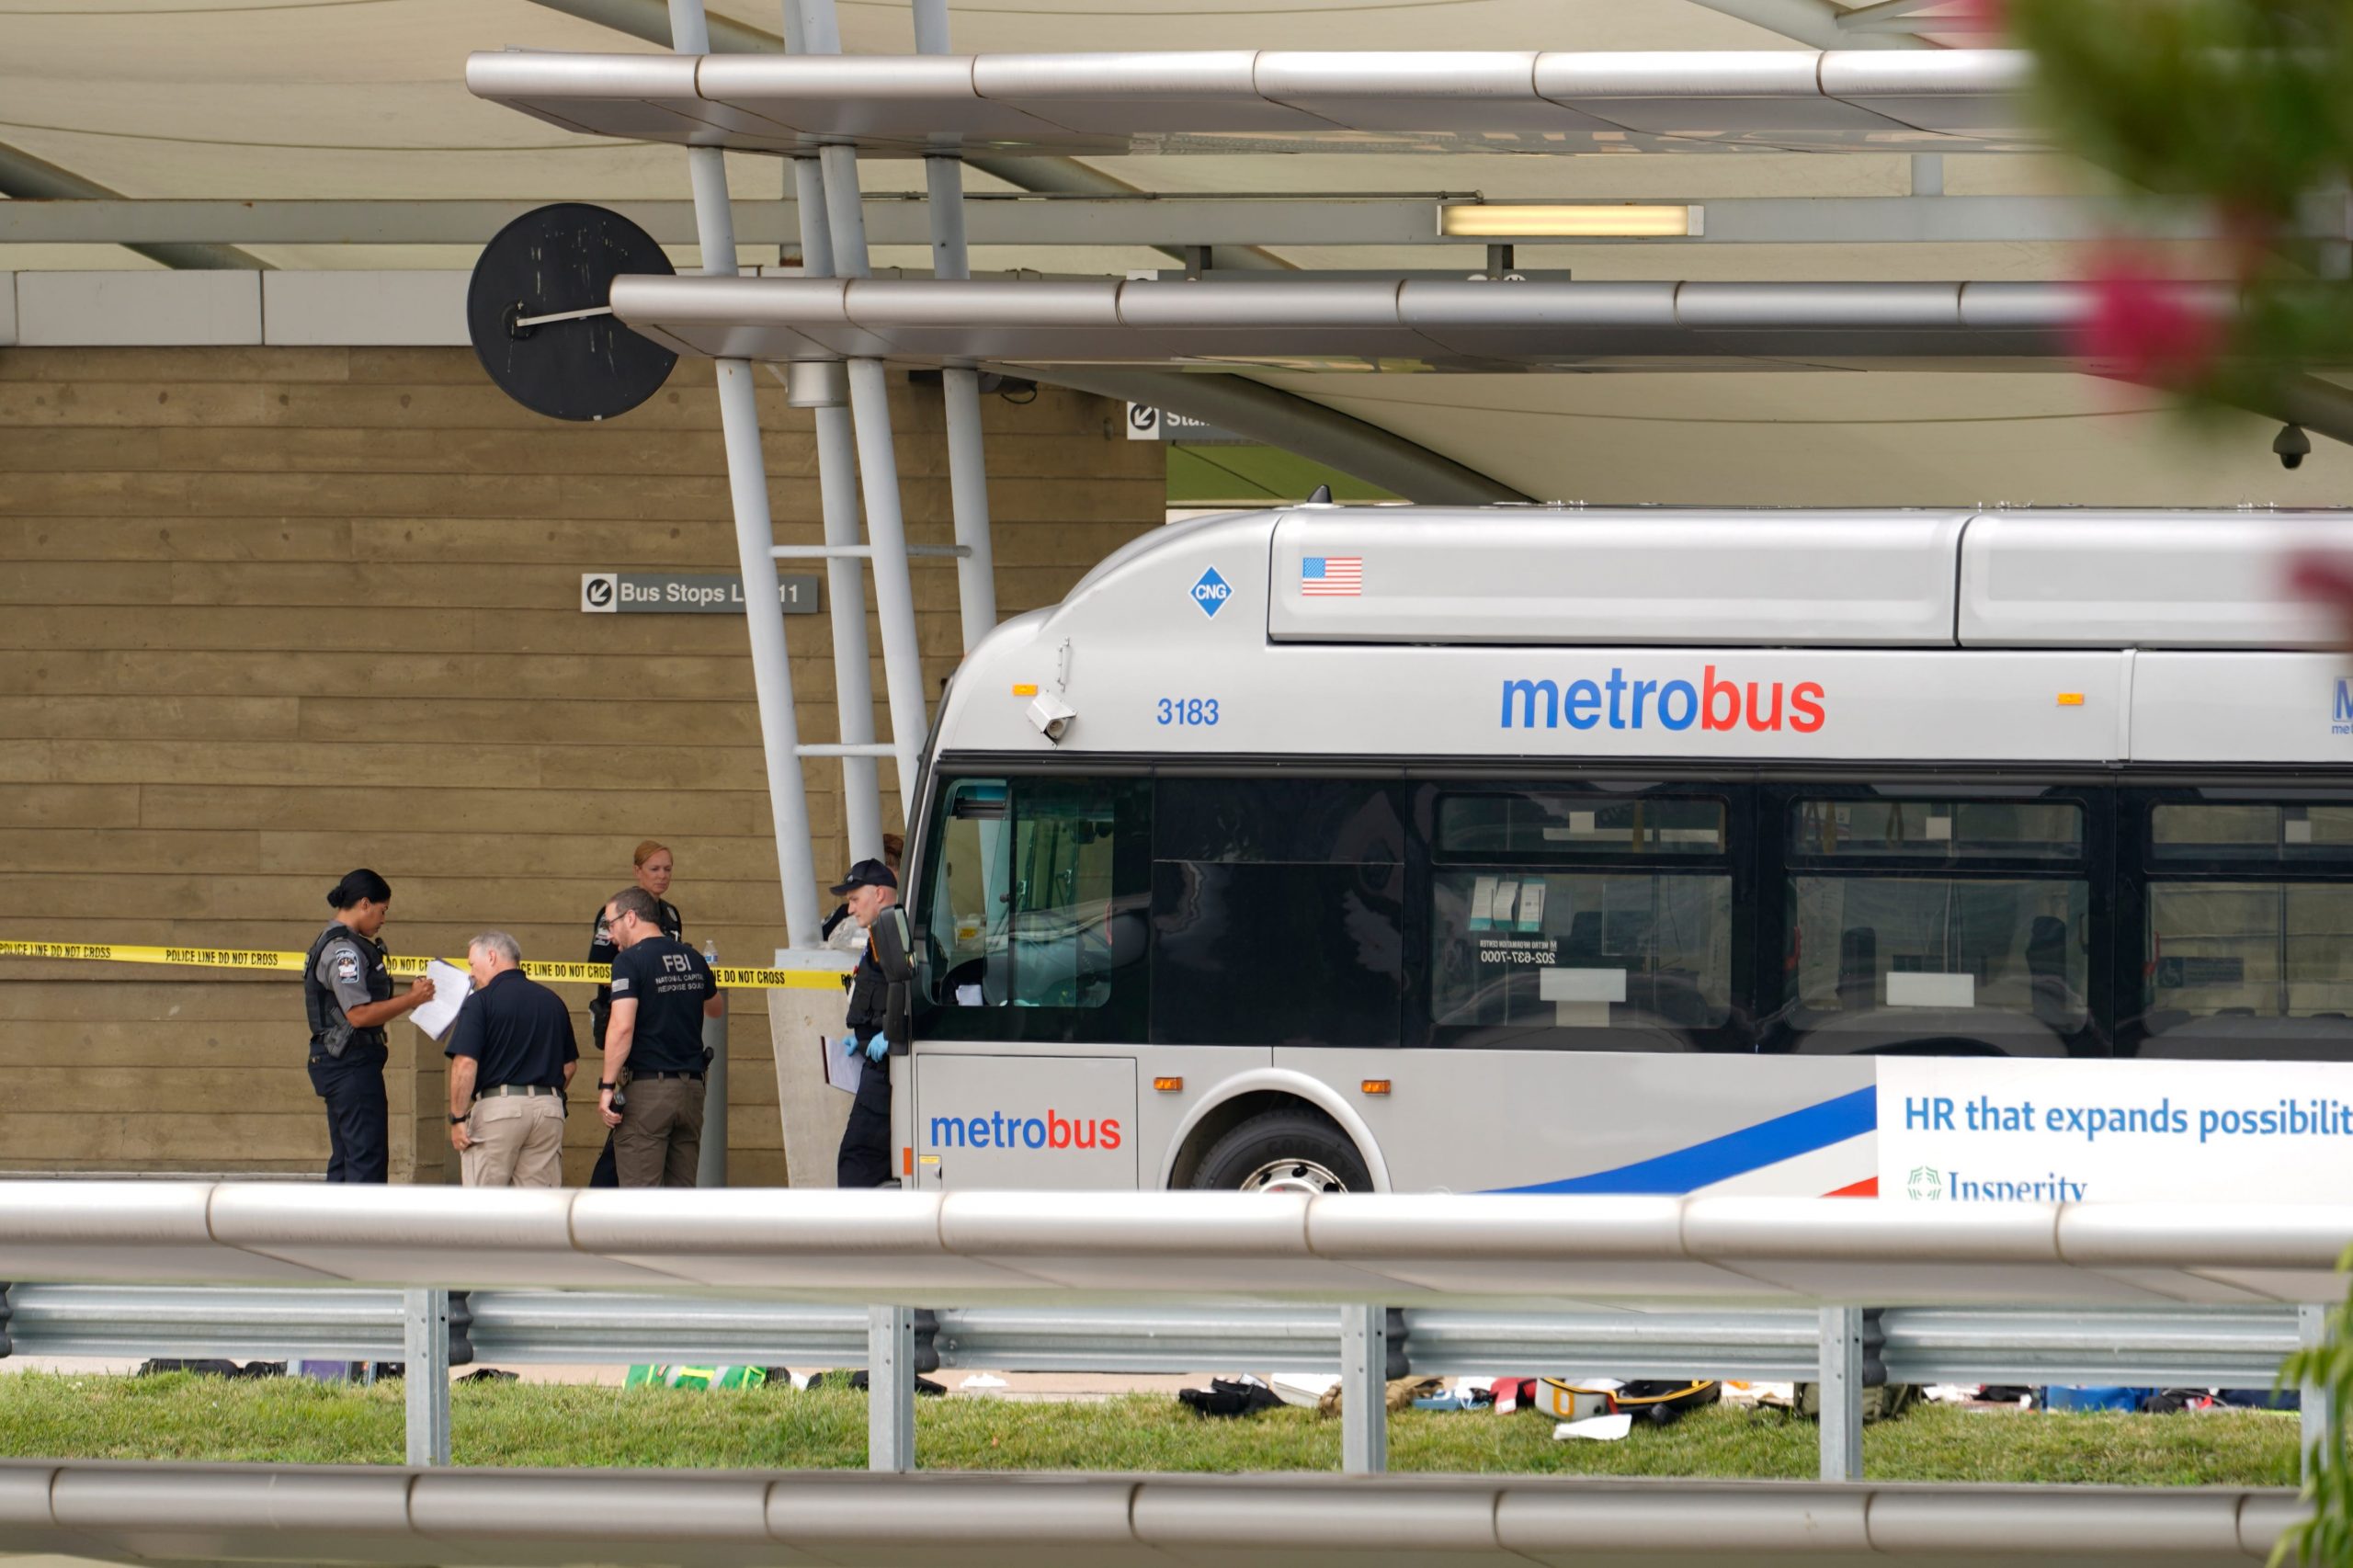 Police are looking at a scene and items are seen on the ground near a Metrobus outside the Pentagon Metro area.